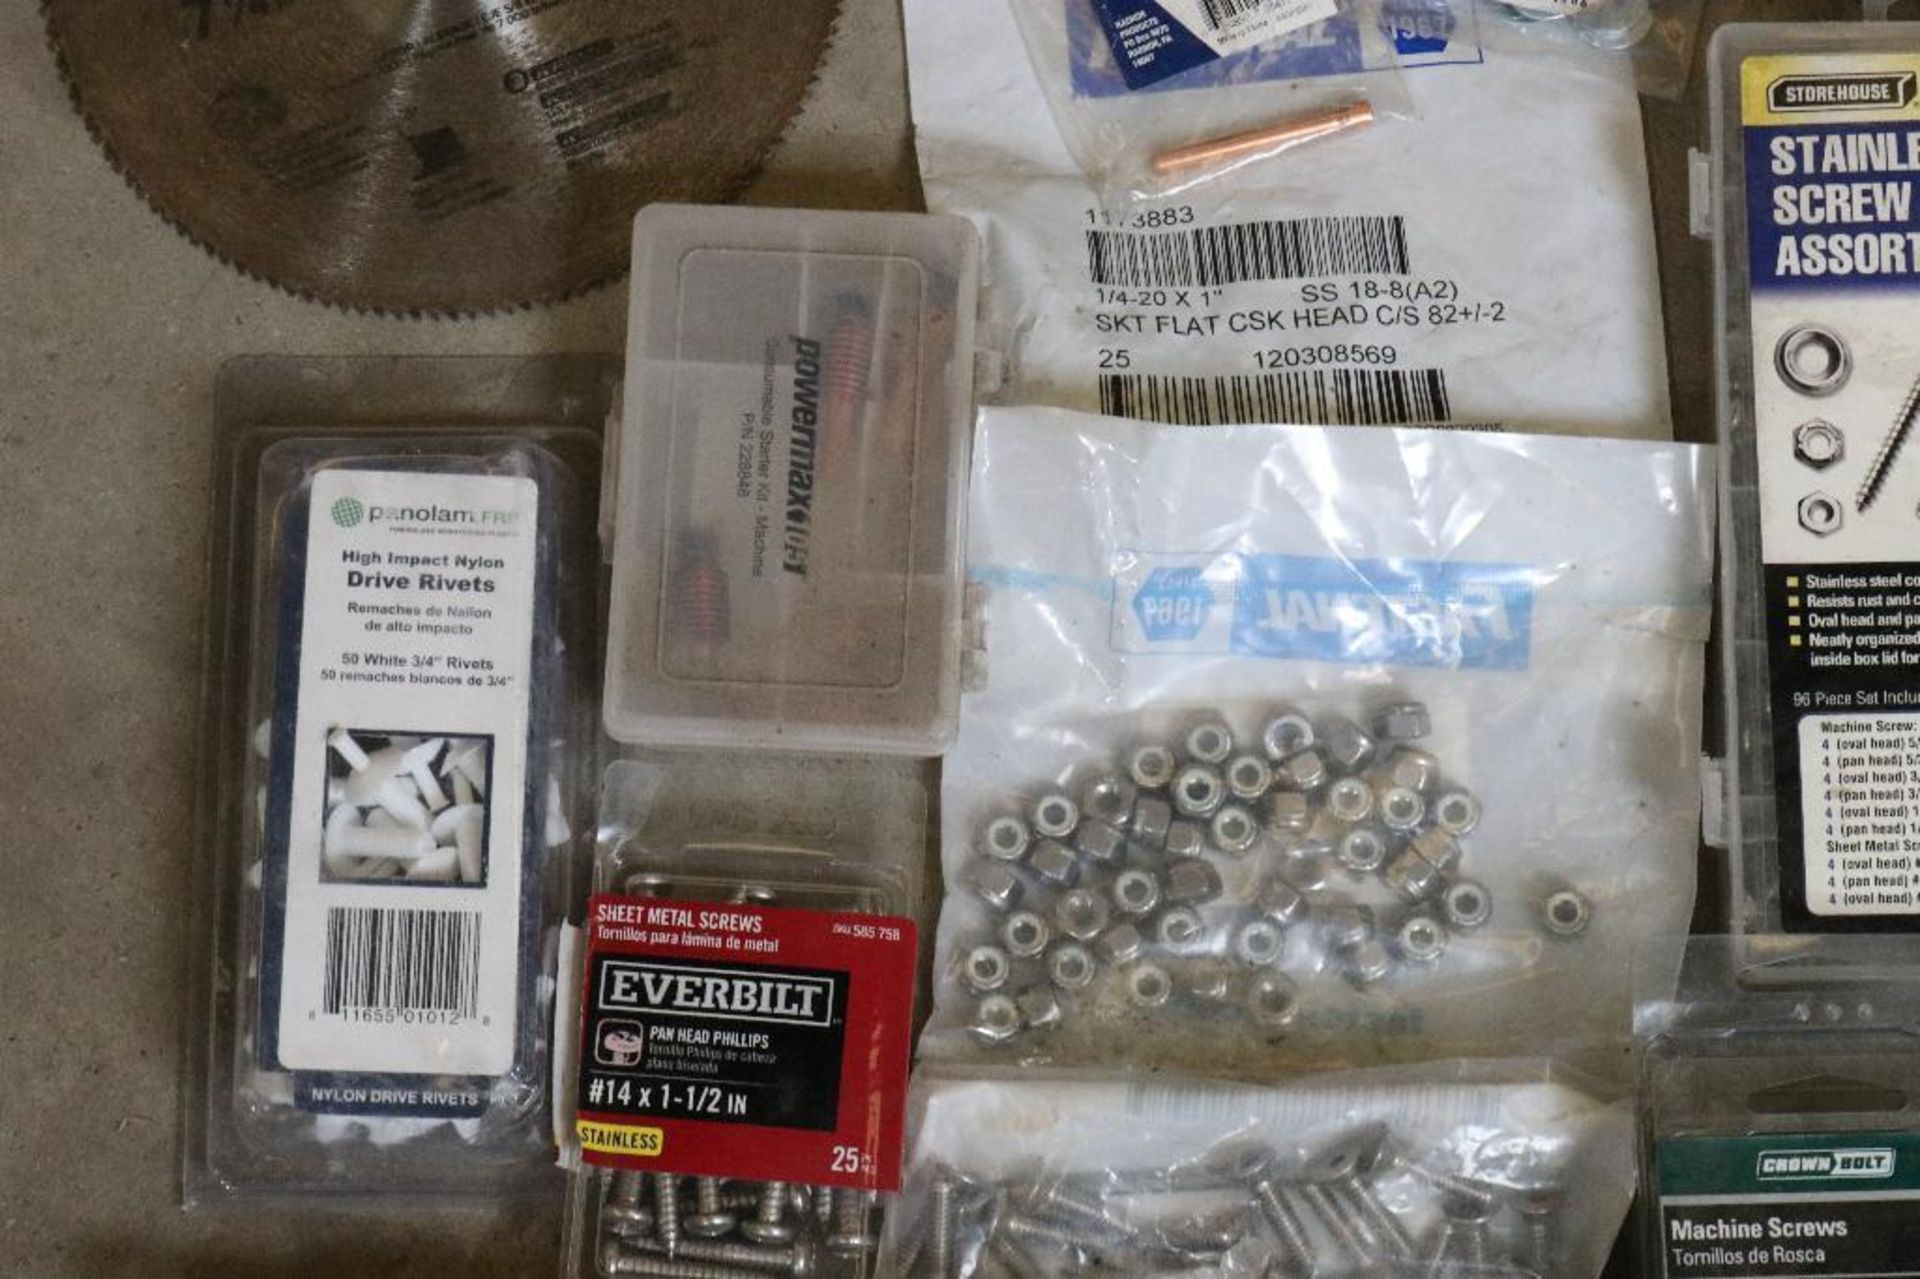 Assortment of Misc. Hardware - Screws, Nozzles, Blades Clamps and More - Image 4 of 9